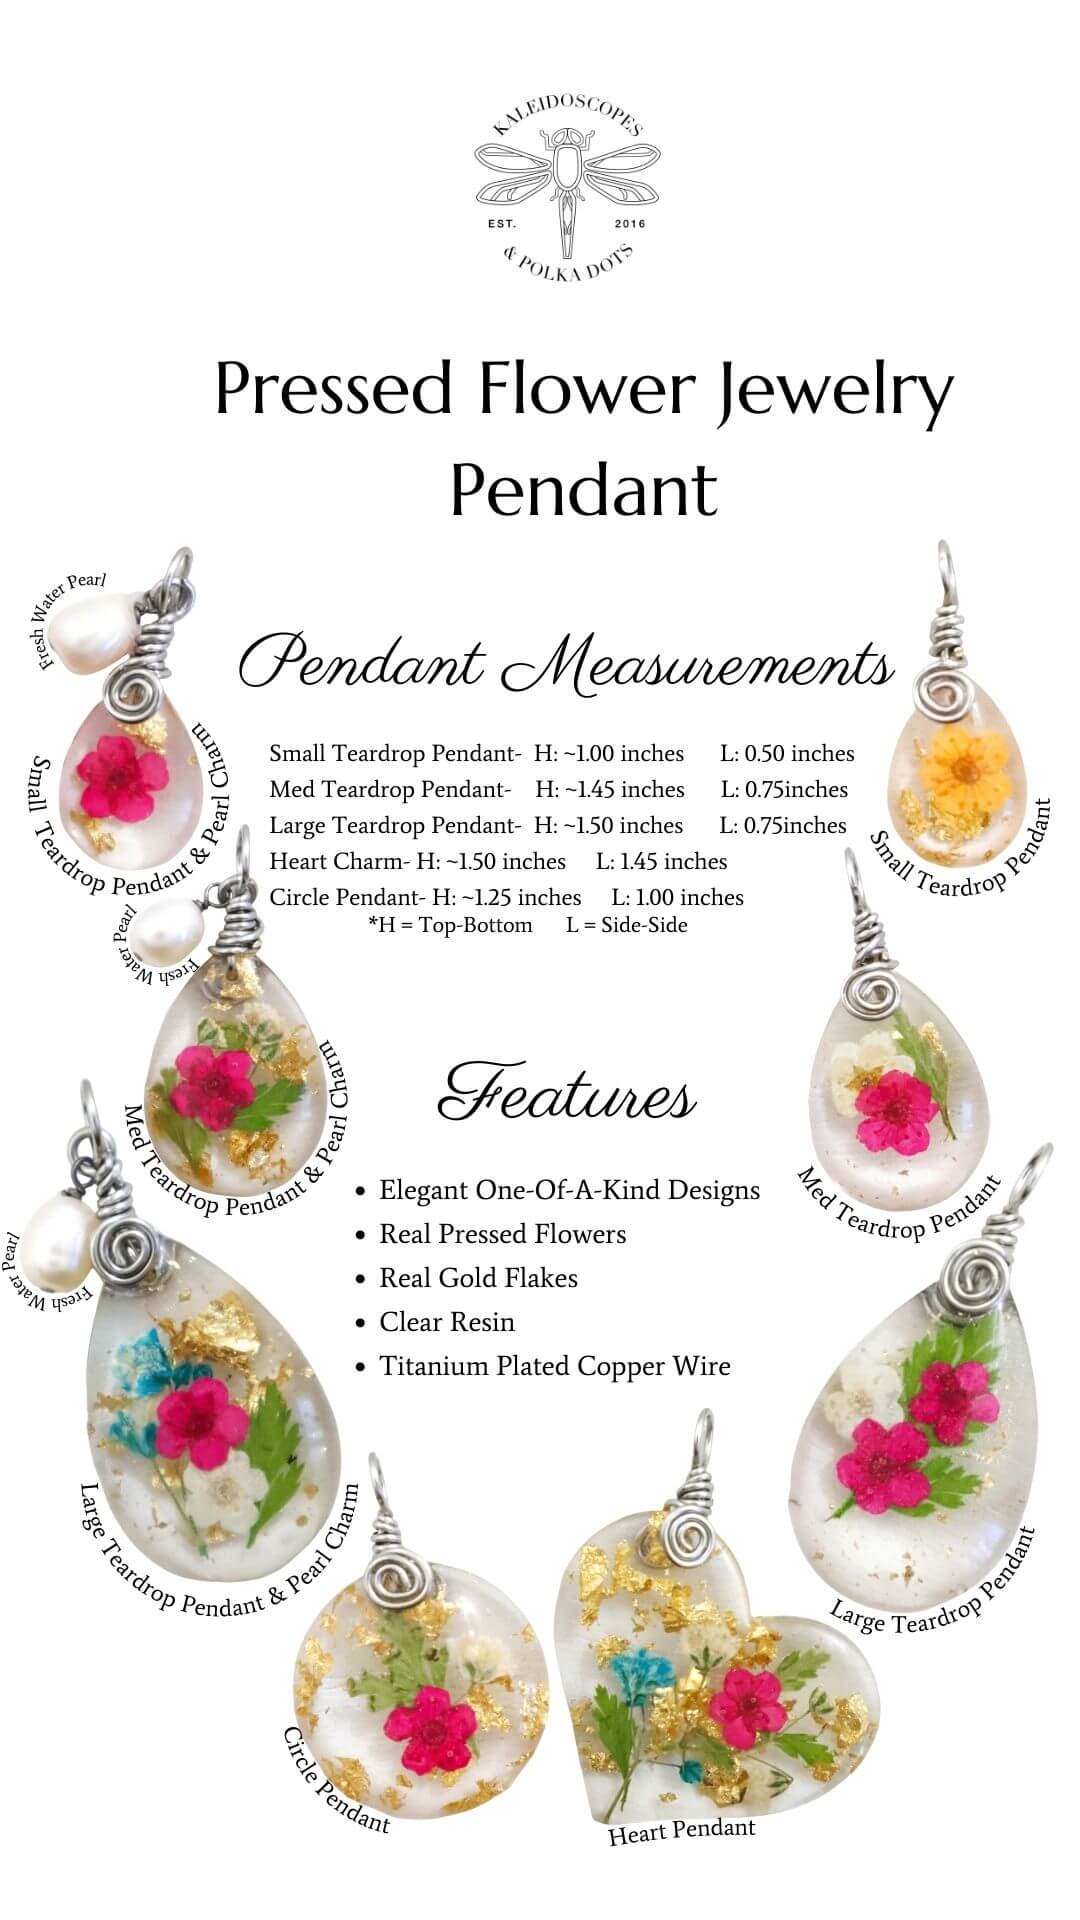 Real Flower Resin Jewelry - Measurements & Features Of Pressed Flower Jewelry Pendants - Kaleidoscopes And Polka Dots